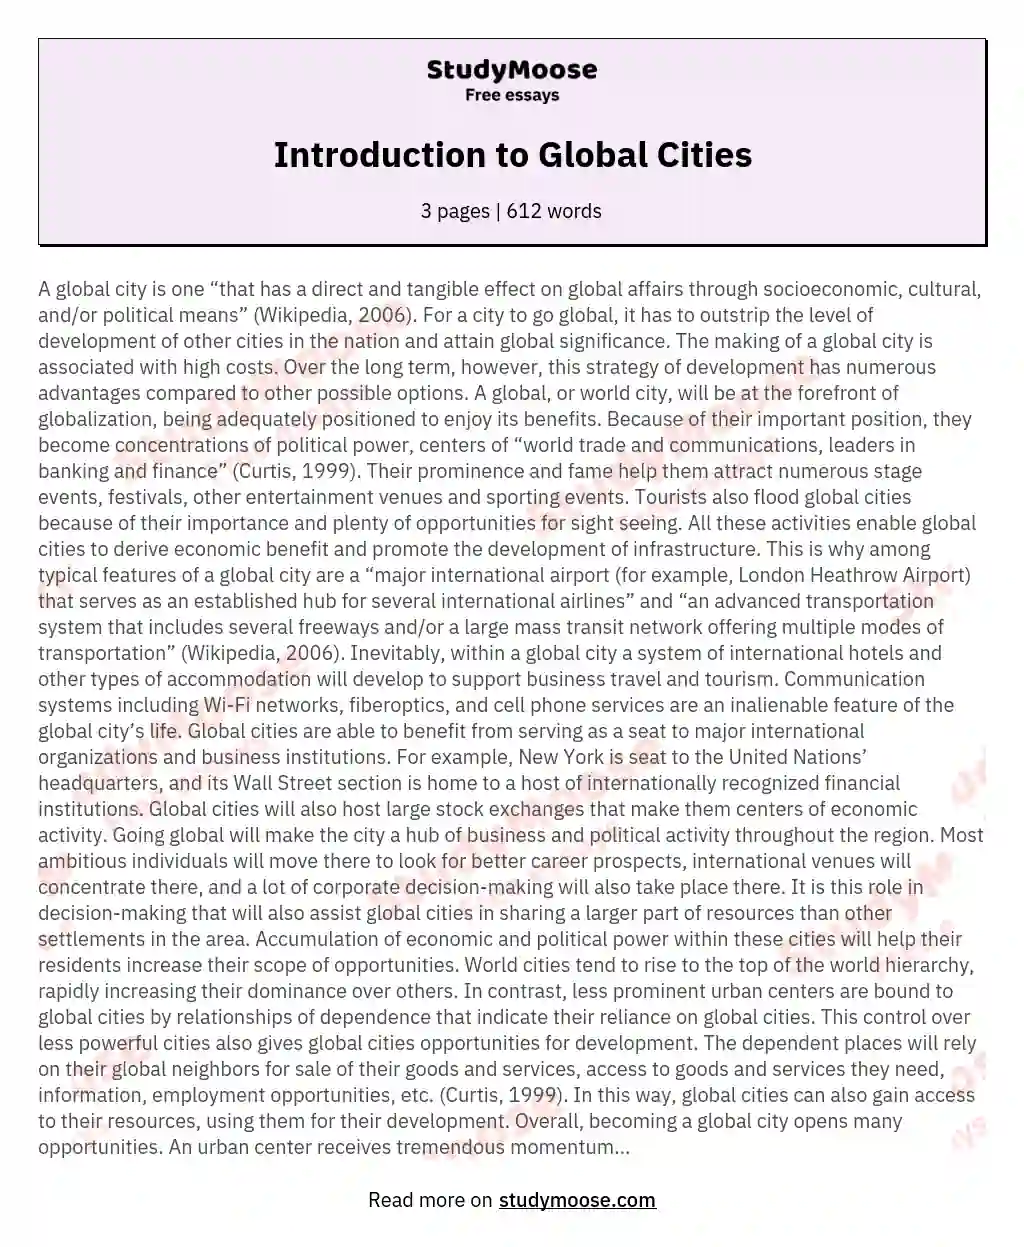 Introduction to Global Cities essay